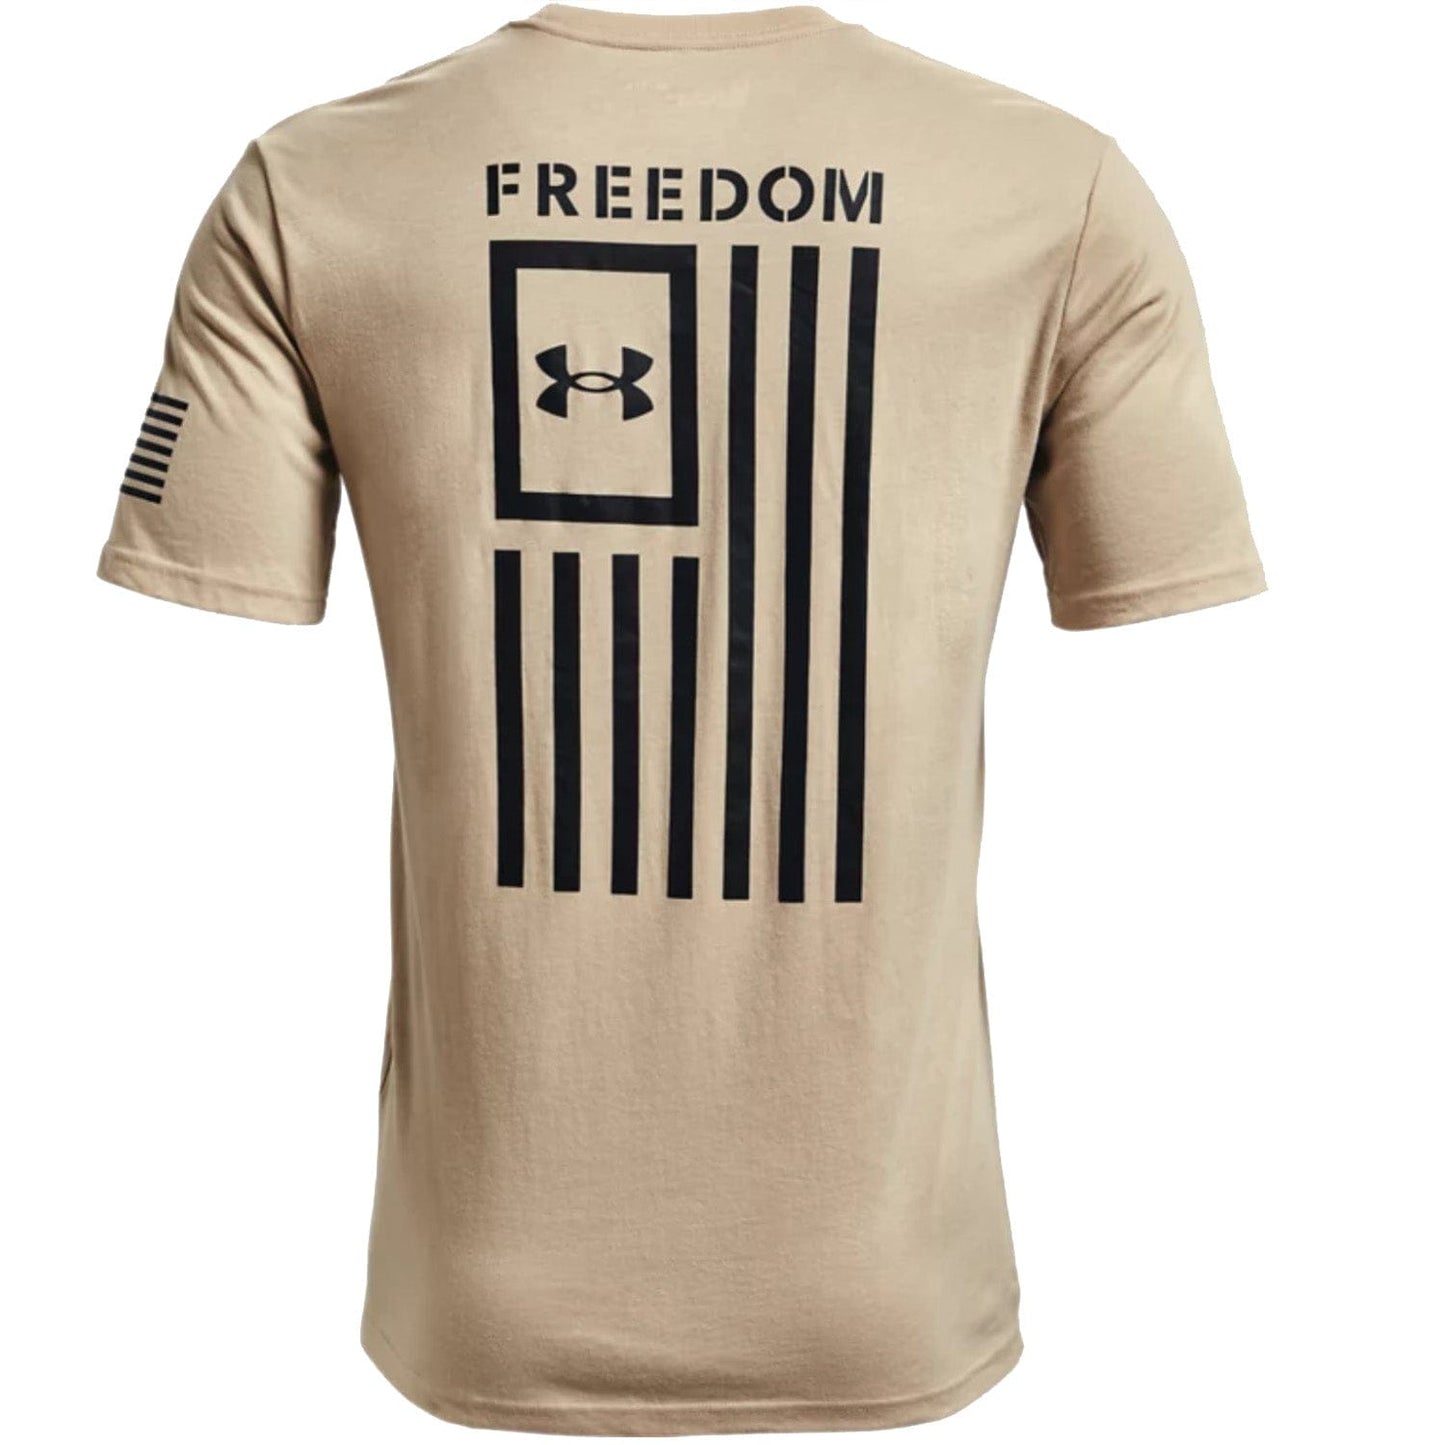 Under Armour New Freedom Flag T by Texas Fowlers